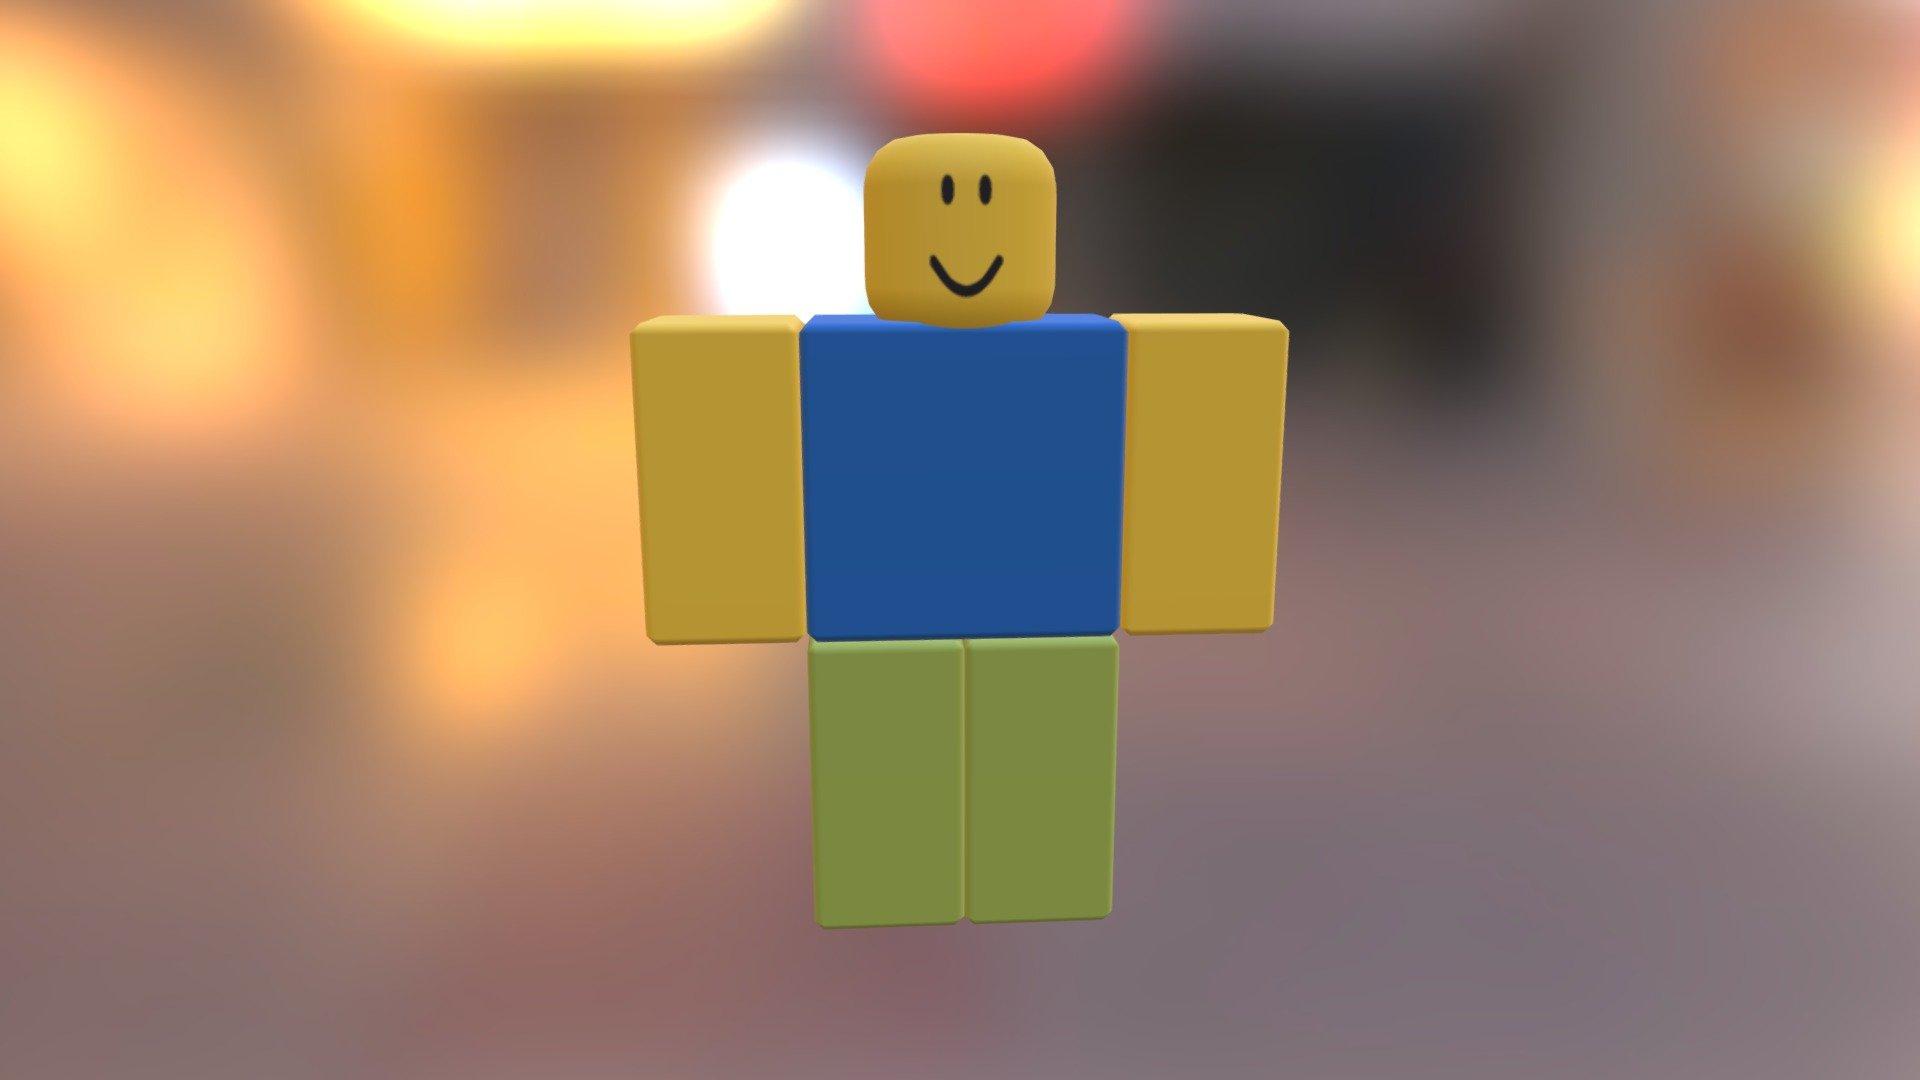 How To Make A Noob In Roblox